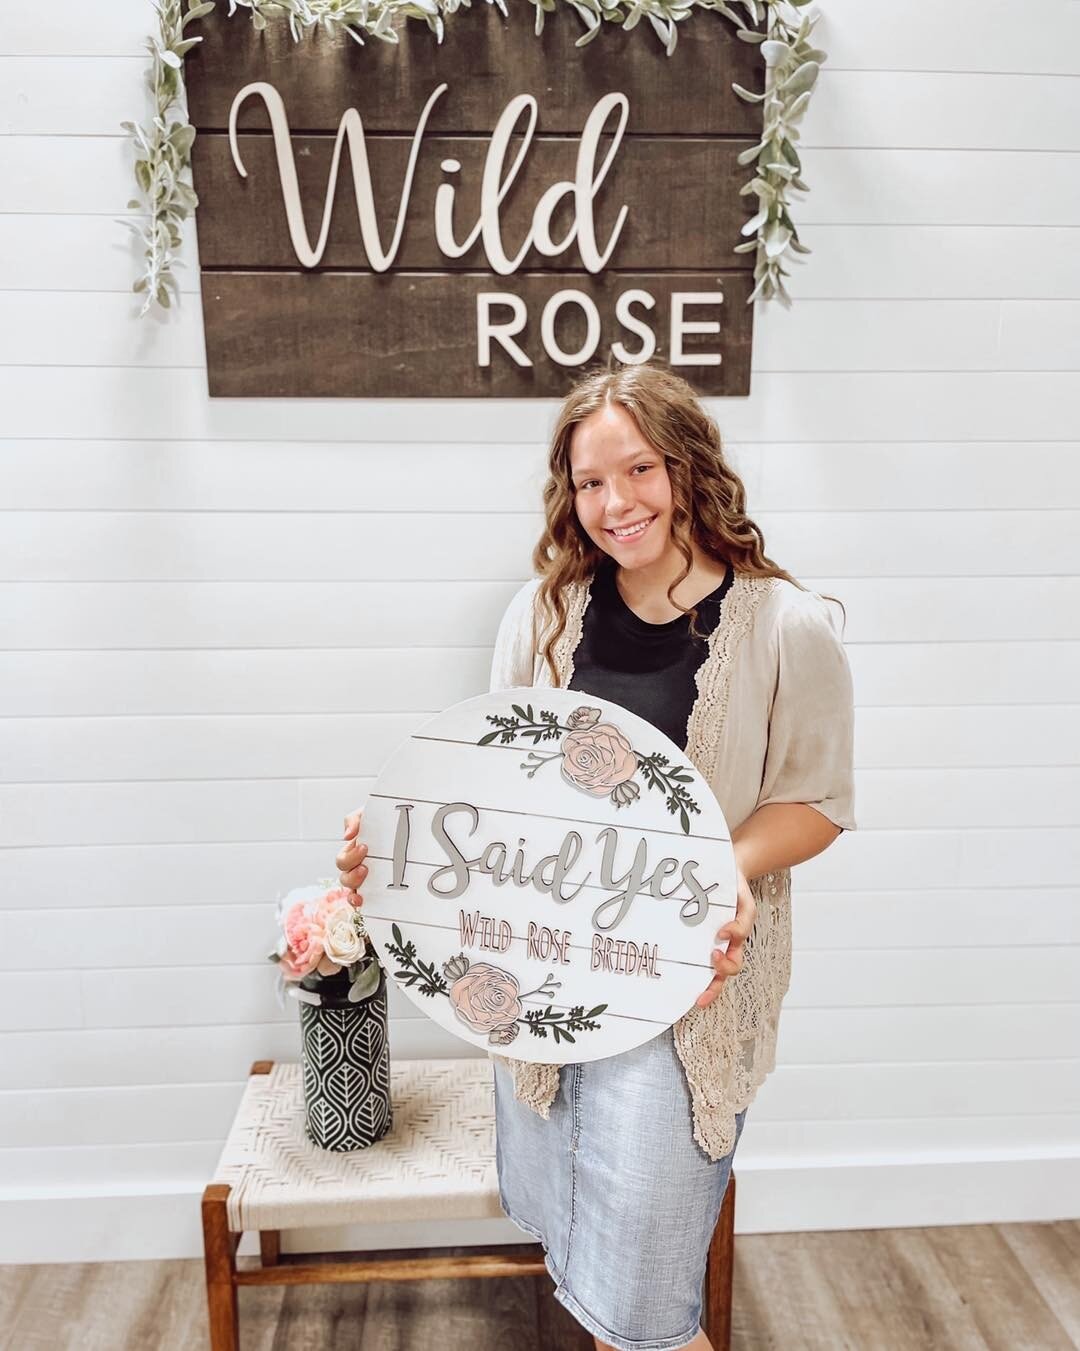 Congratulations to our four gorgeous Saturday brides!❤️🌹

Thank you so much for choosing Wild Rose Bridal! We loved getting to know each of you! ❤️

#wildrosebridal